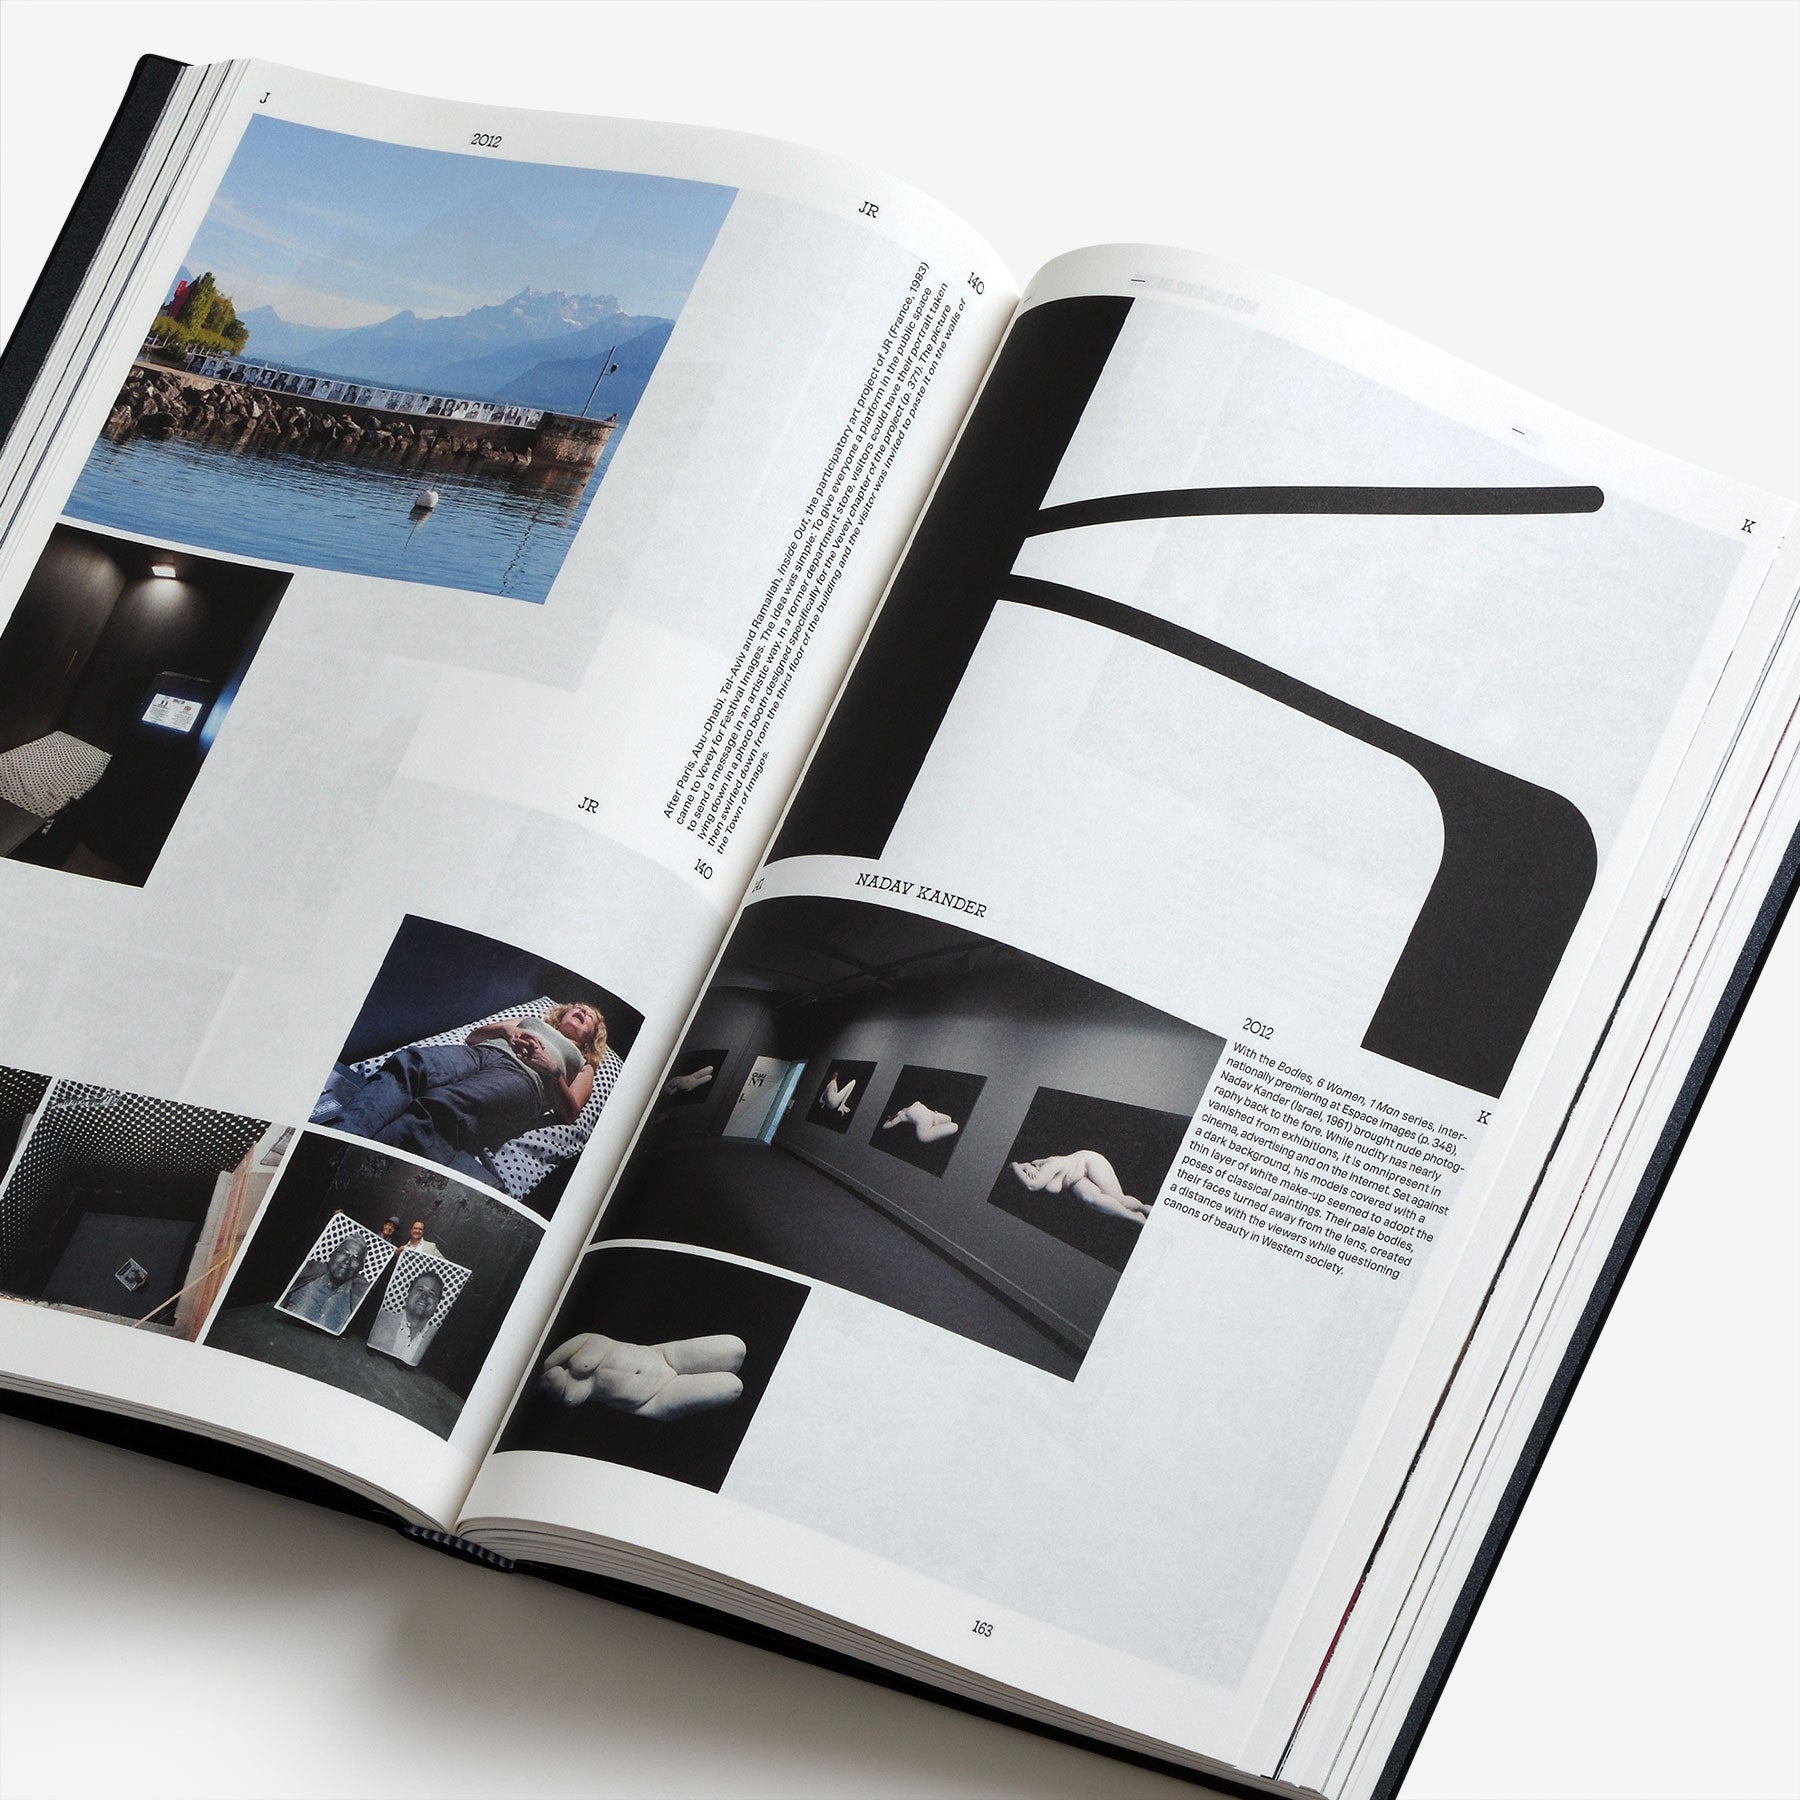 The Book of Images: An Illustrated Dictionary of Visual Experiences